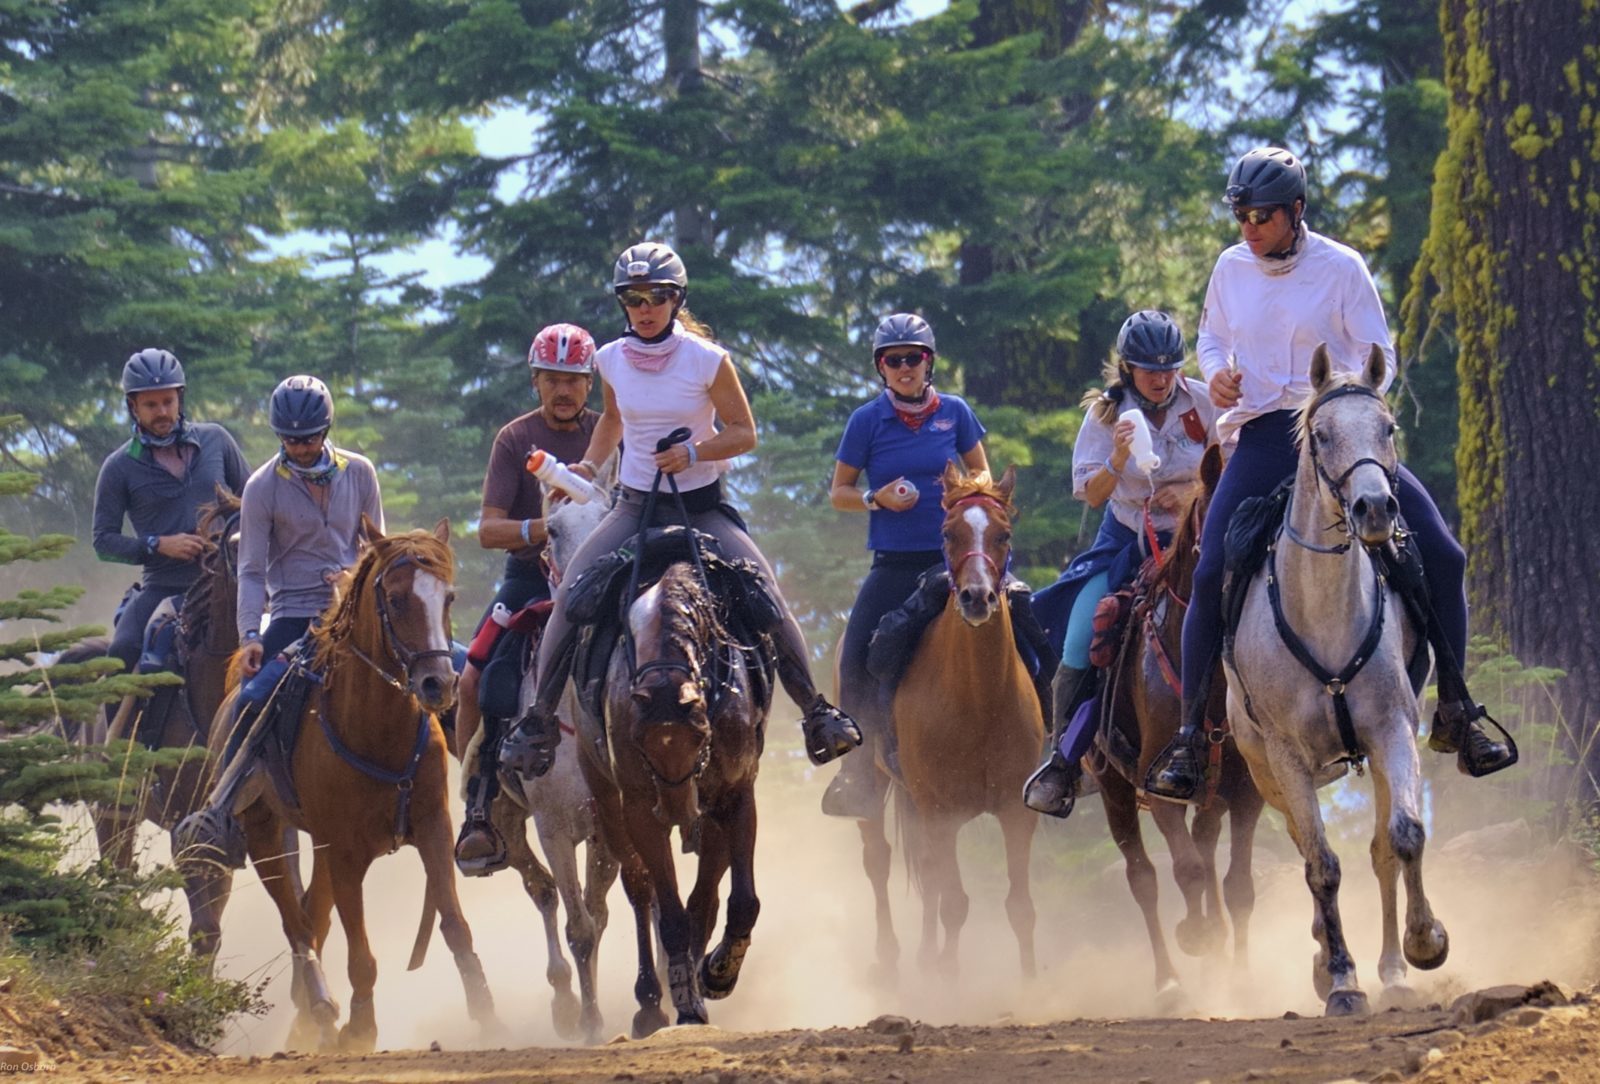 Getting Started with Endurance Riding